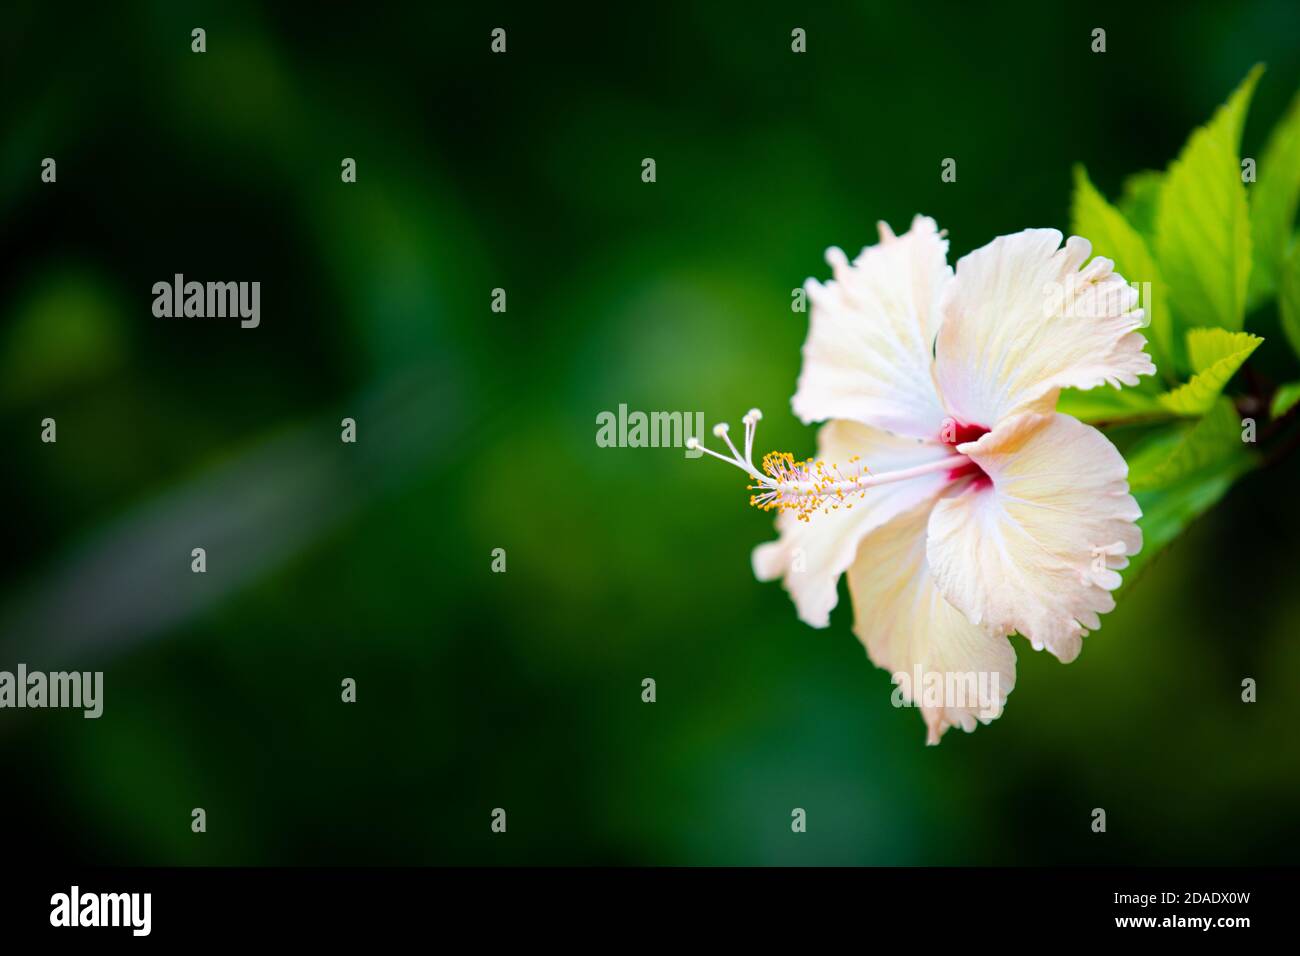 Exotic floral banner, white hibiscus flower and dark tropical foliage nature closeup. Peaceful tranquil relaxing nature flower, blooming romantic Stock Photo